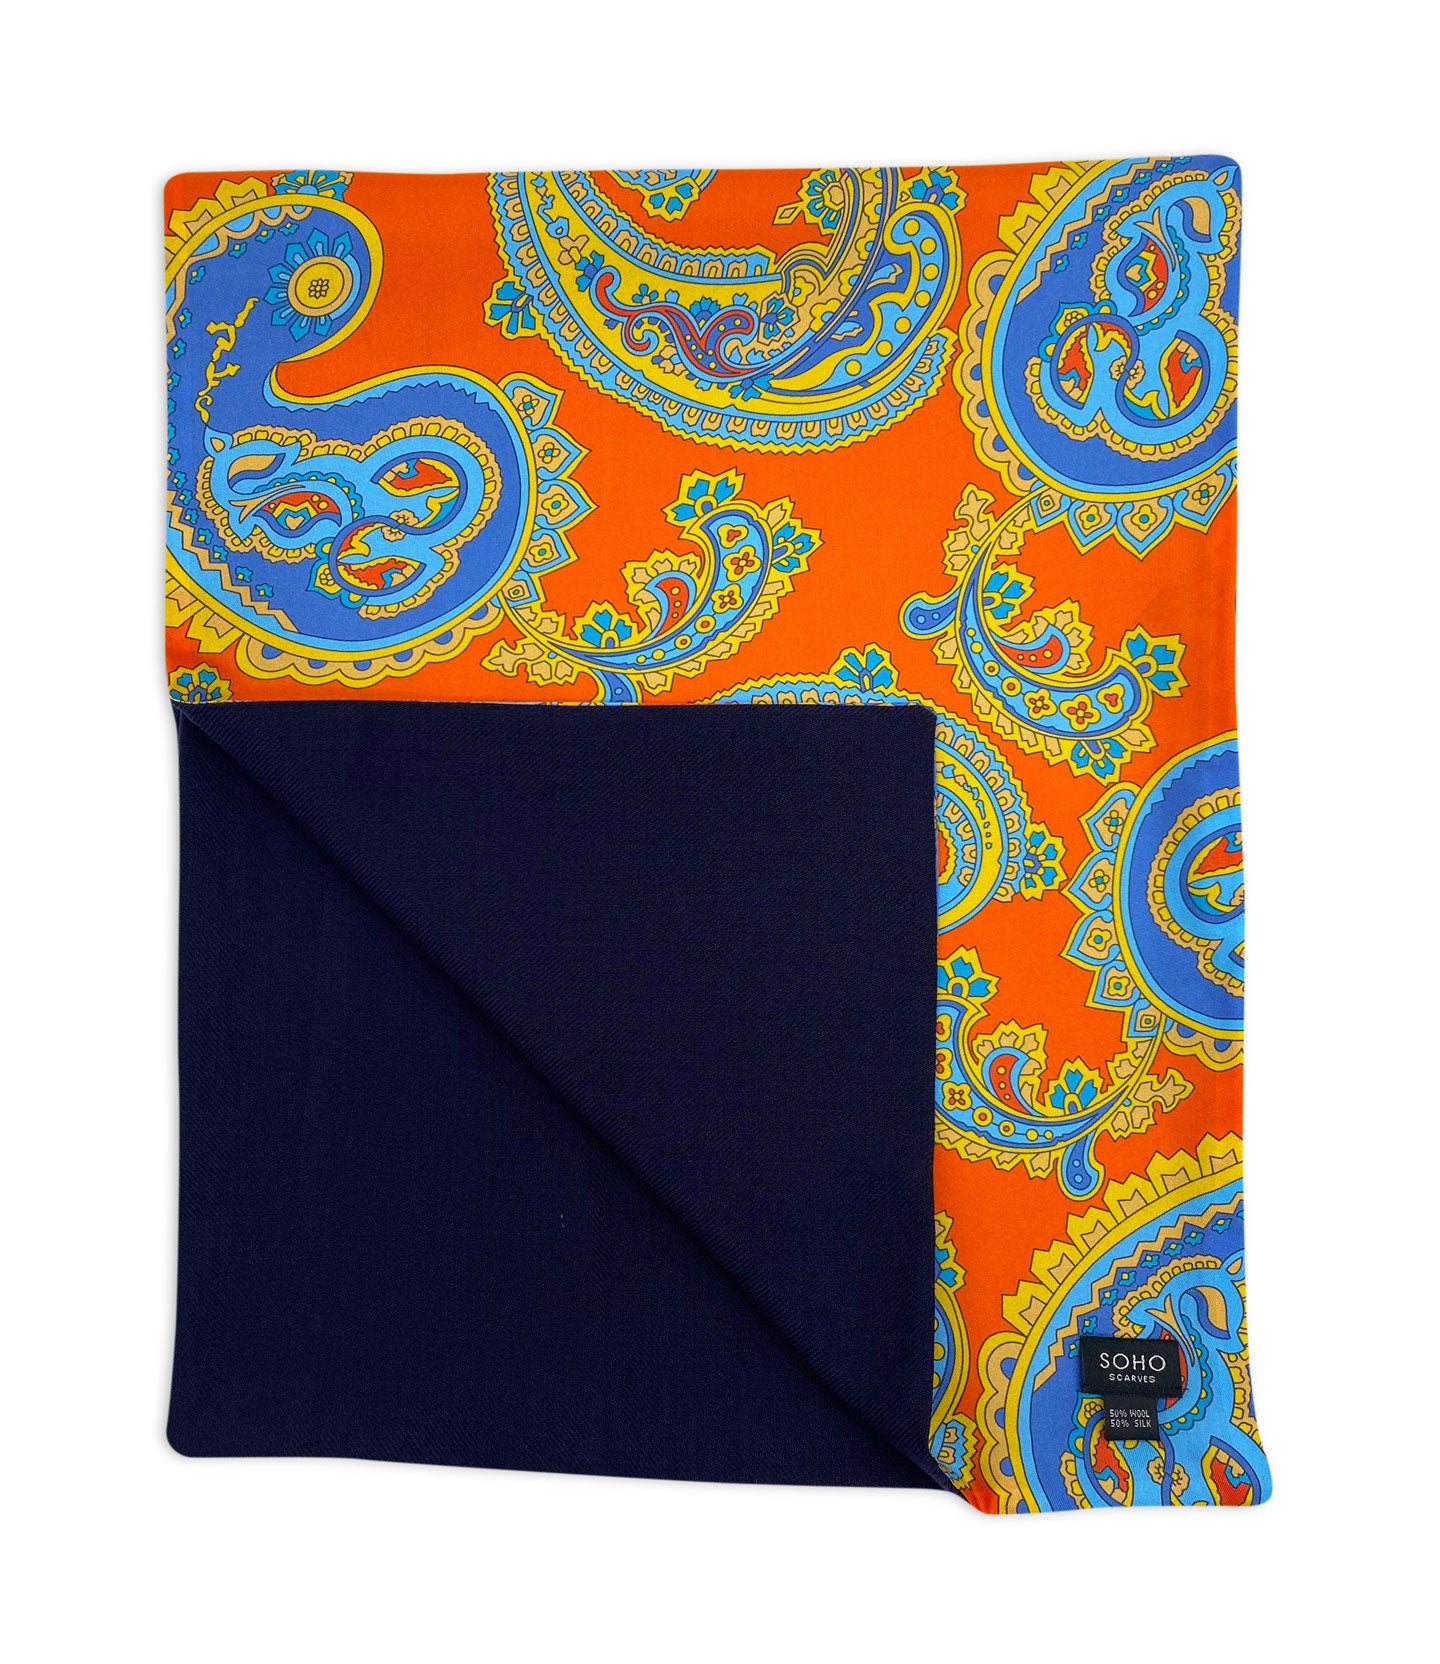 The wide version of 'The Orange' multicoloured paisley wool-lined silk dress scarf on a deep orange background. Arranged in a square shape with a corner folded back to reveal the fine navy woollen underside.